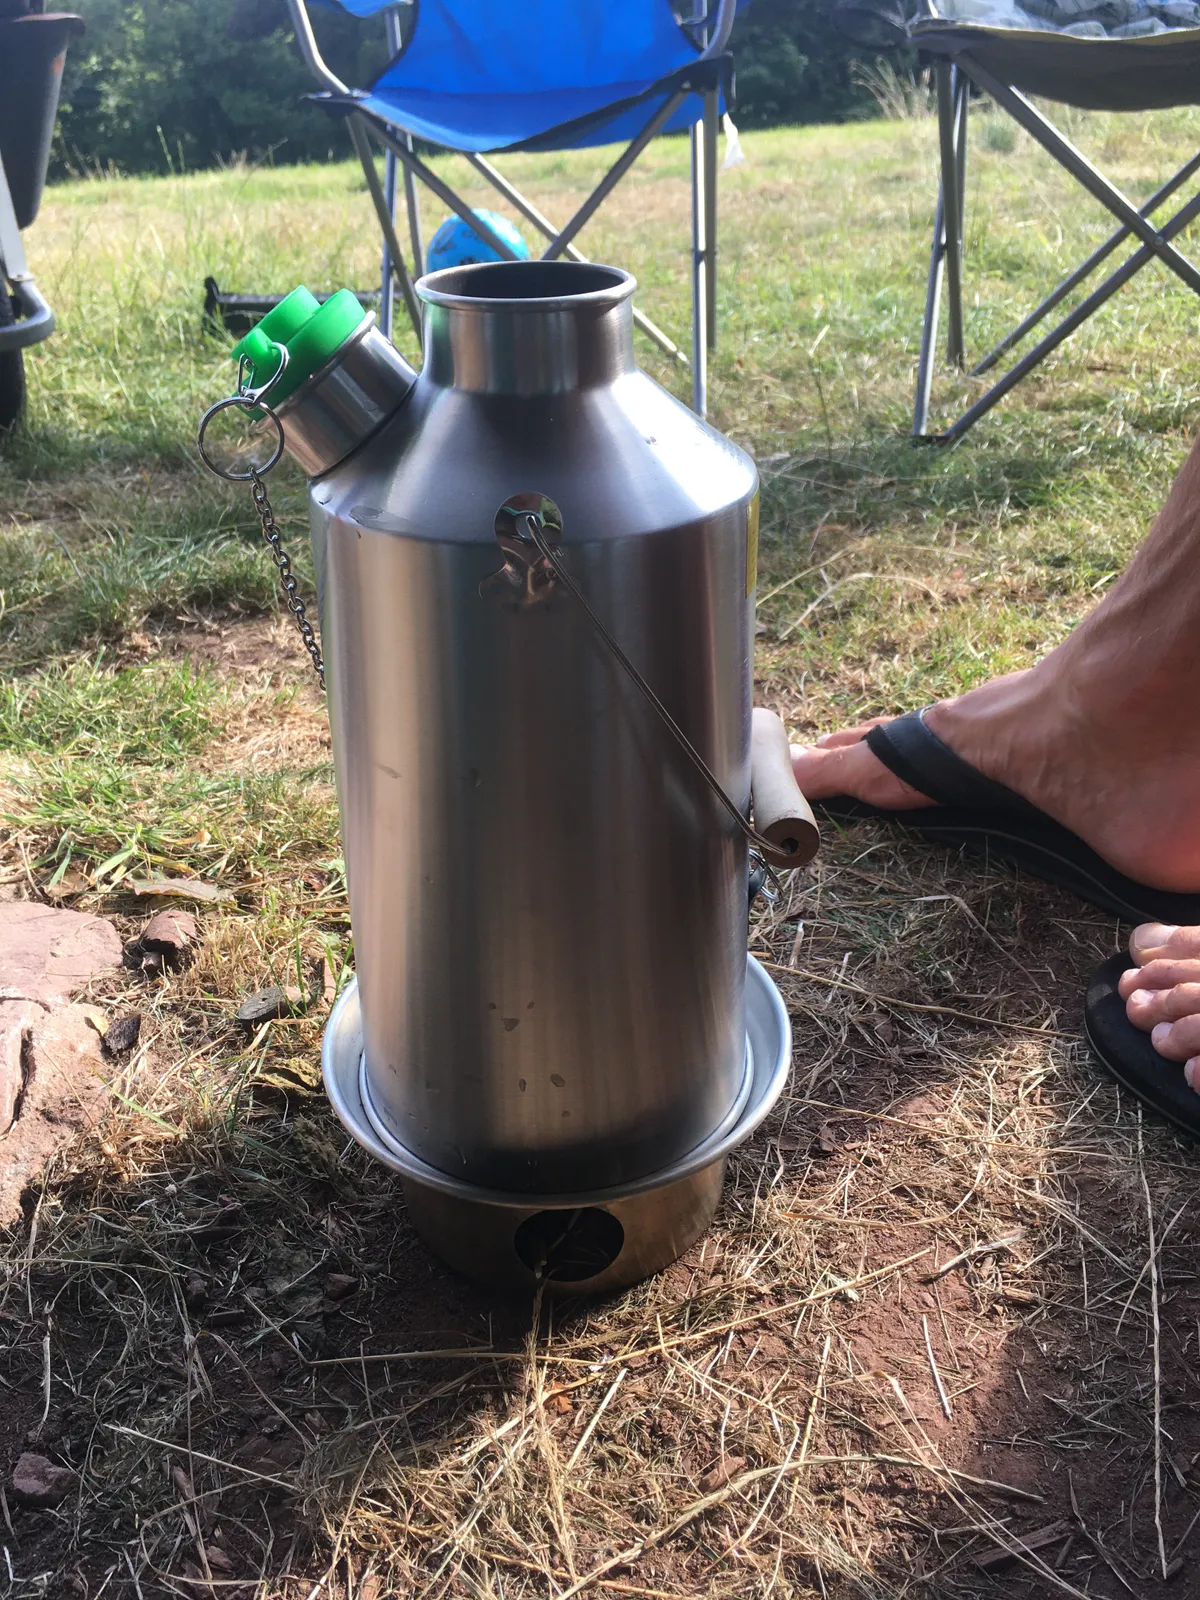 Stainless steel Kelly Kettle with green whistle stopper in a field with camping chair in background